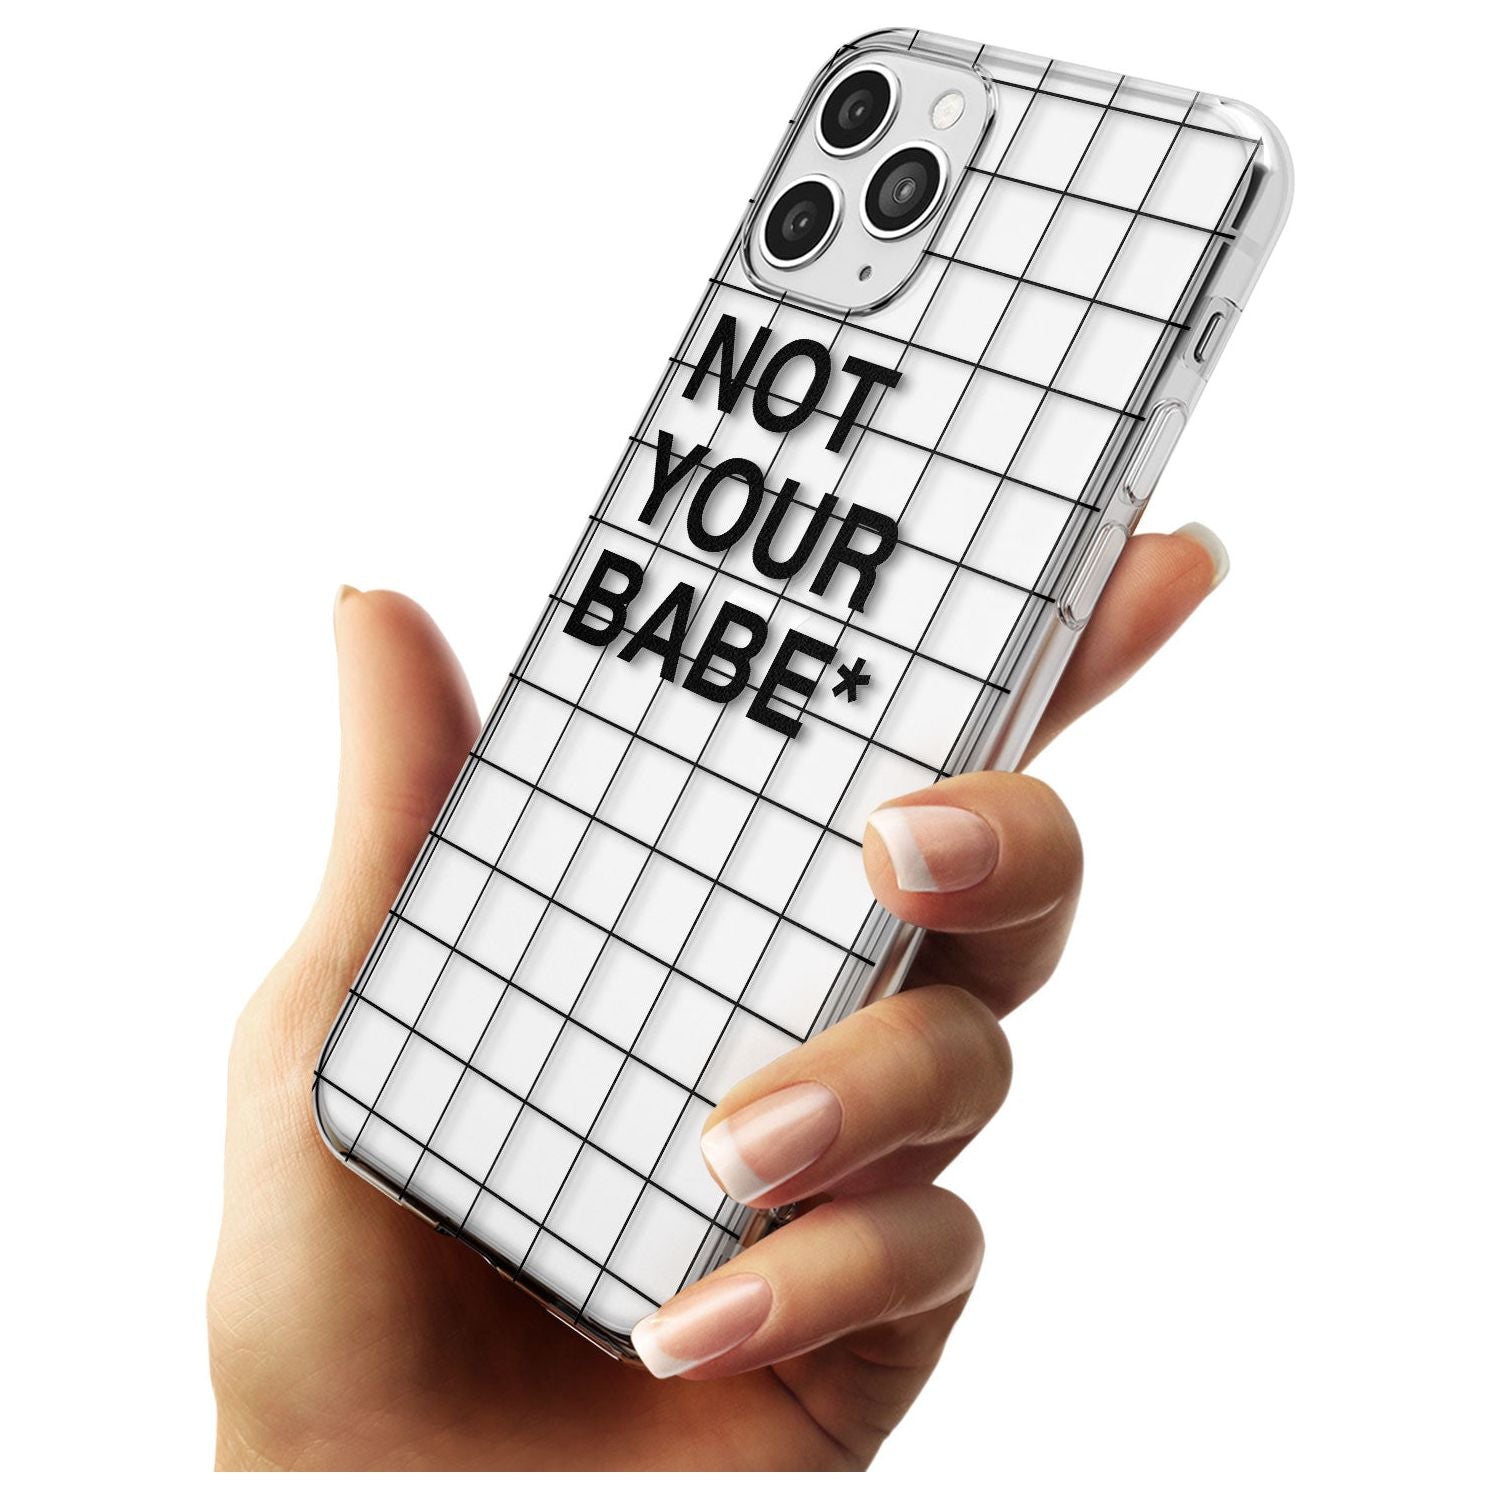 Grid Pattern Not Your Babe Slim TPU Phone Case for iPhone 11 Pro Max